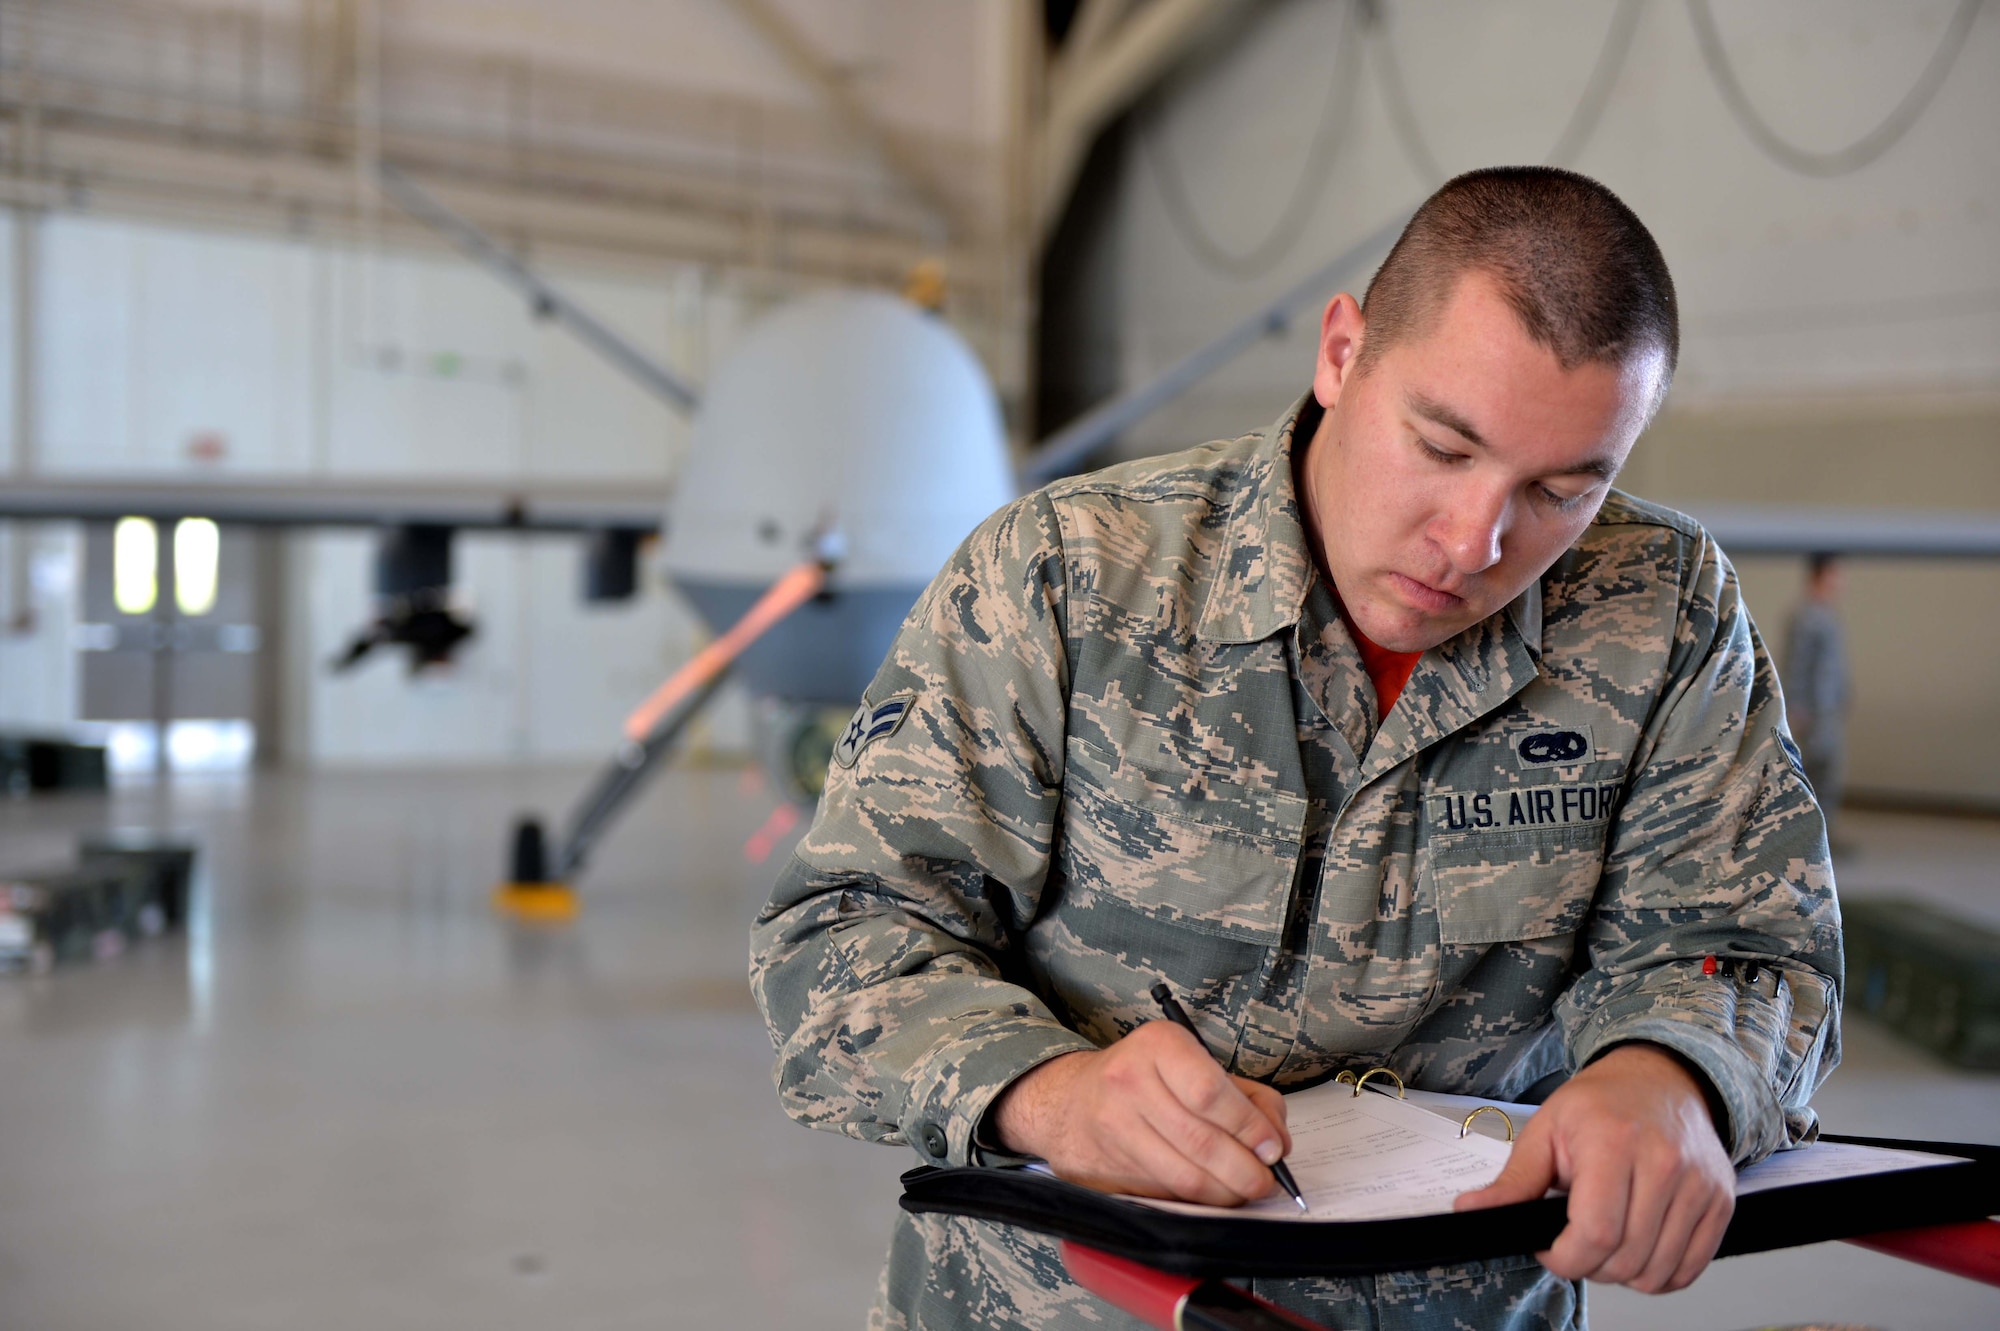 Airman 1st Class Stuart, 432nd AMXS weapons load crew member, prepares for the 2015 Load Crew of the Year competition March 10, 2016, at Creech Air Force Base, Nevada. Stuart was selected from Tiger Aircraft Maintenence Unit to load munitions for the competition based on his performance in the unit.